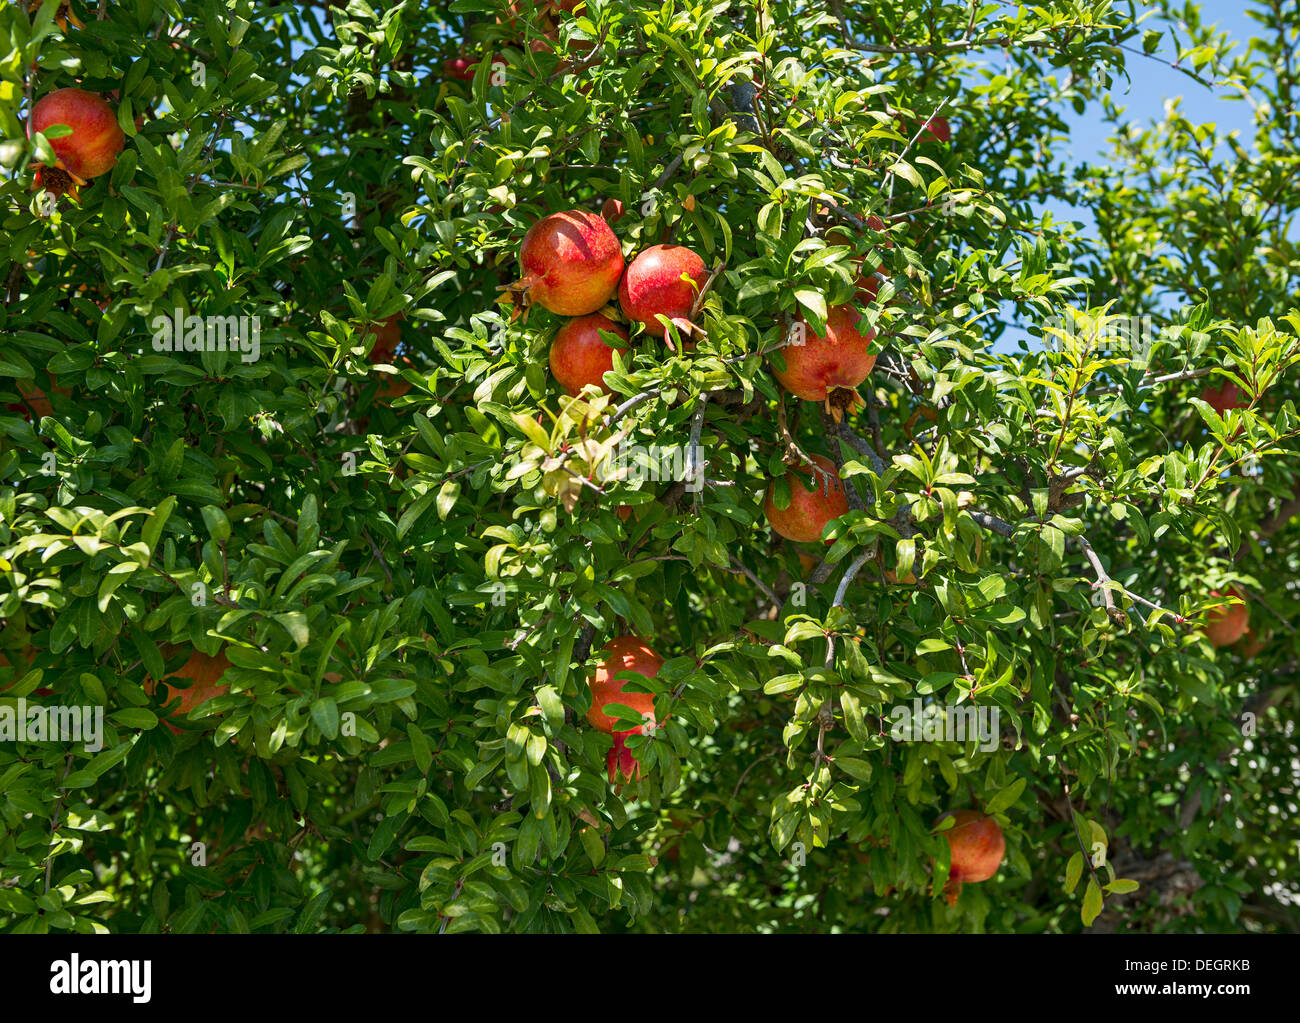 Red and ripe pomegranate, Punica granatum hanging from a tree. Stock Photo